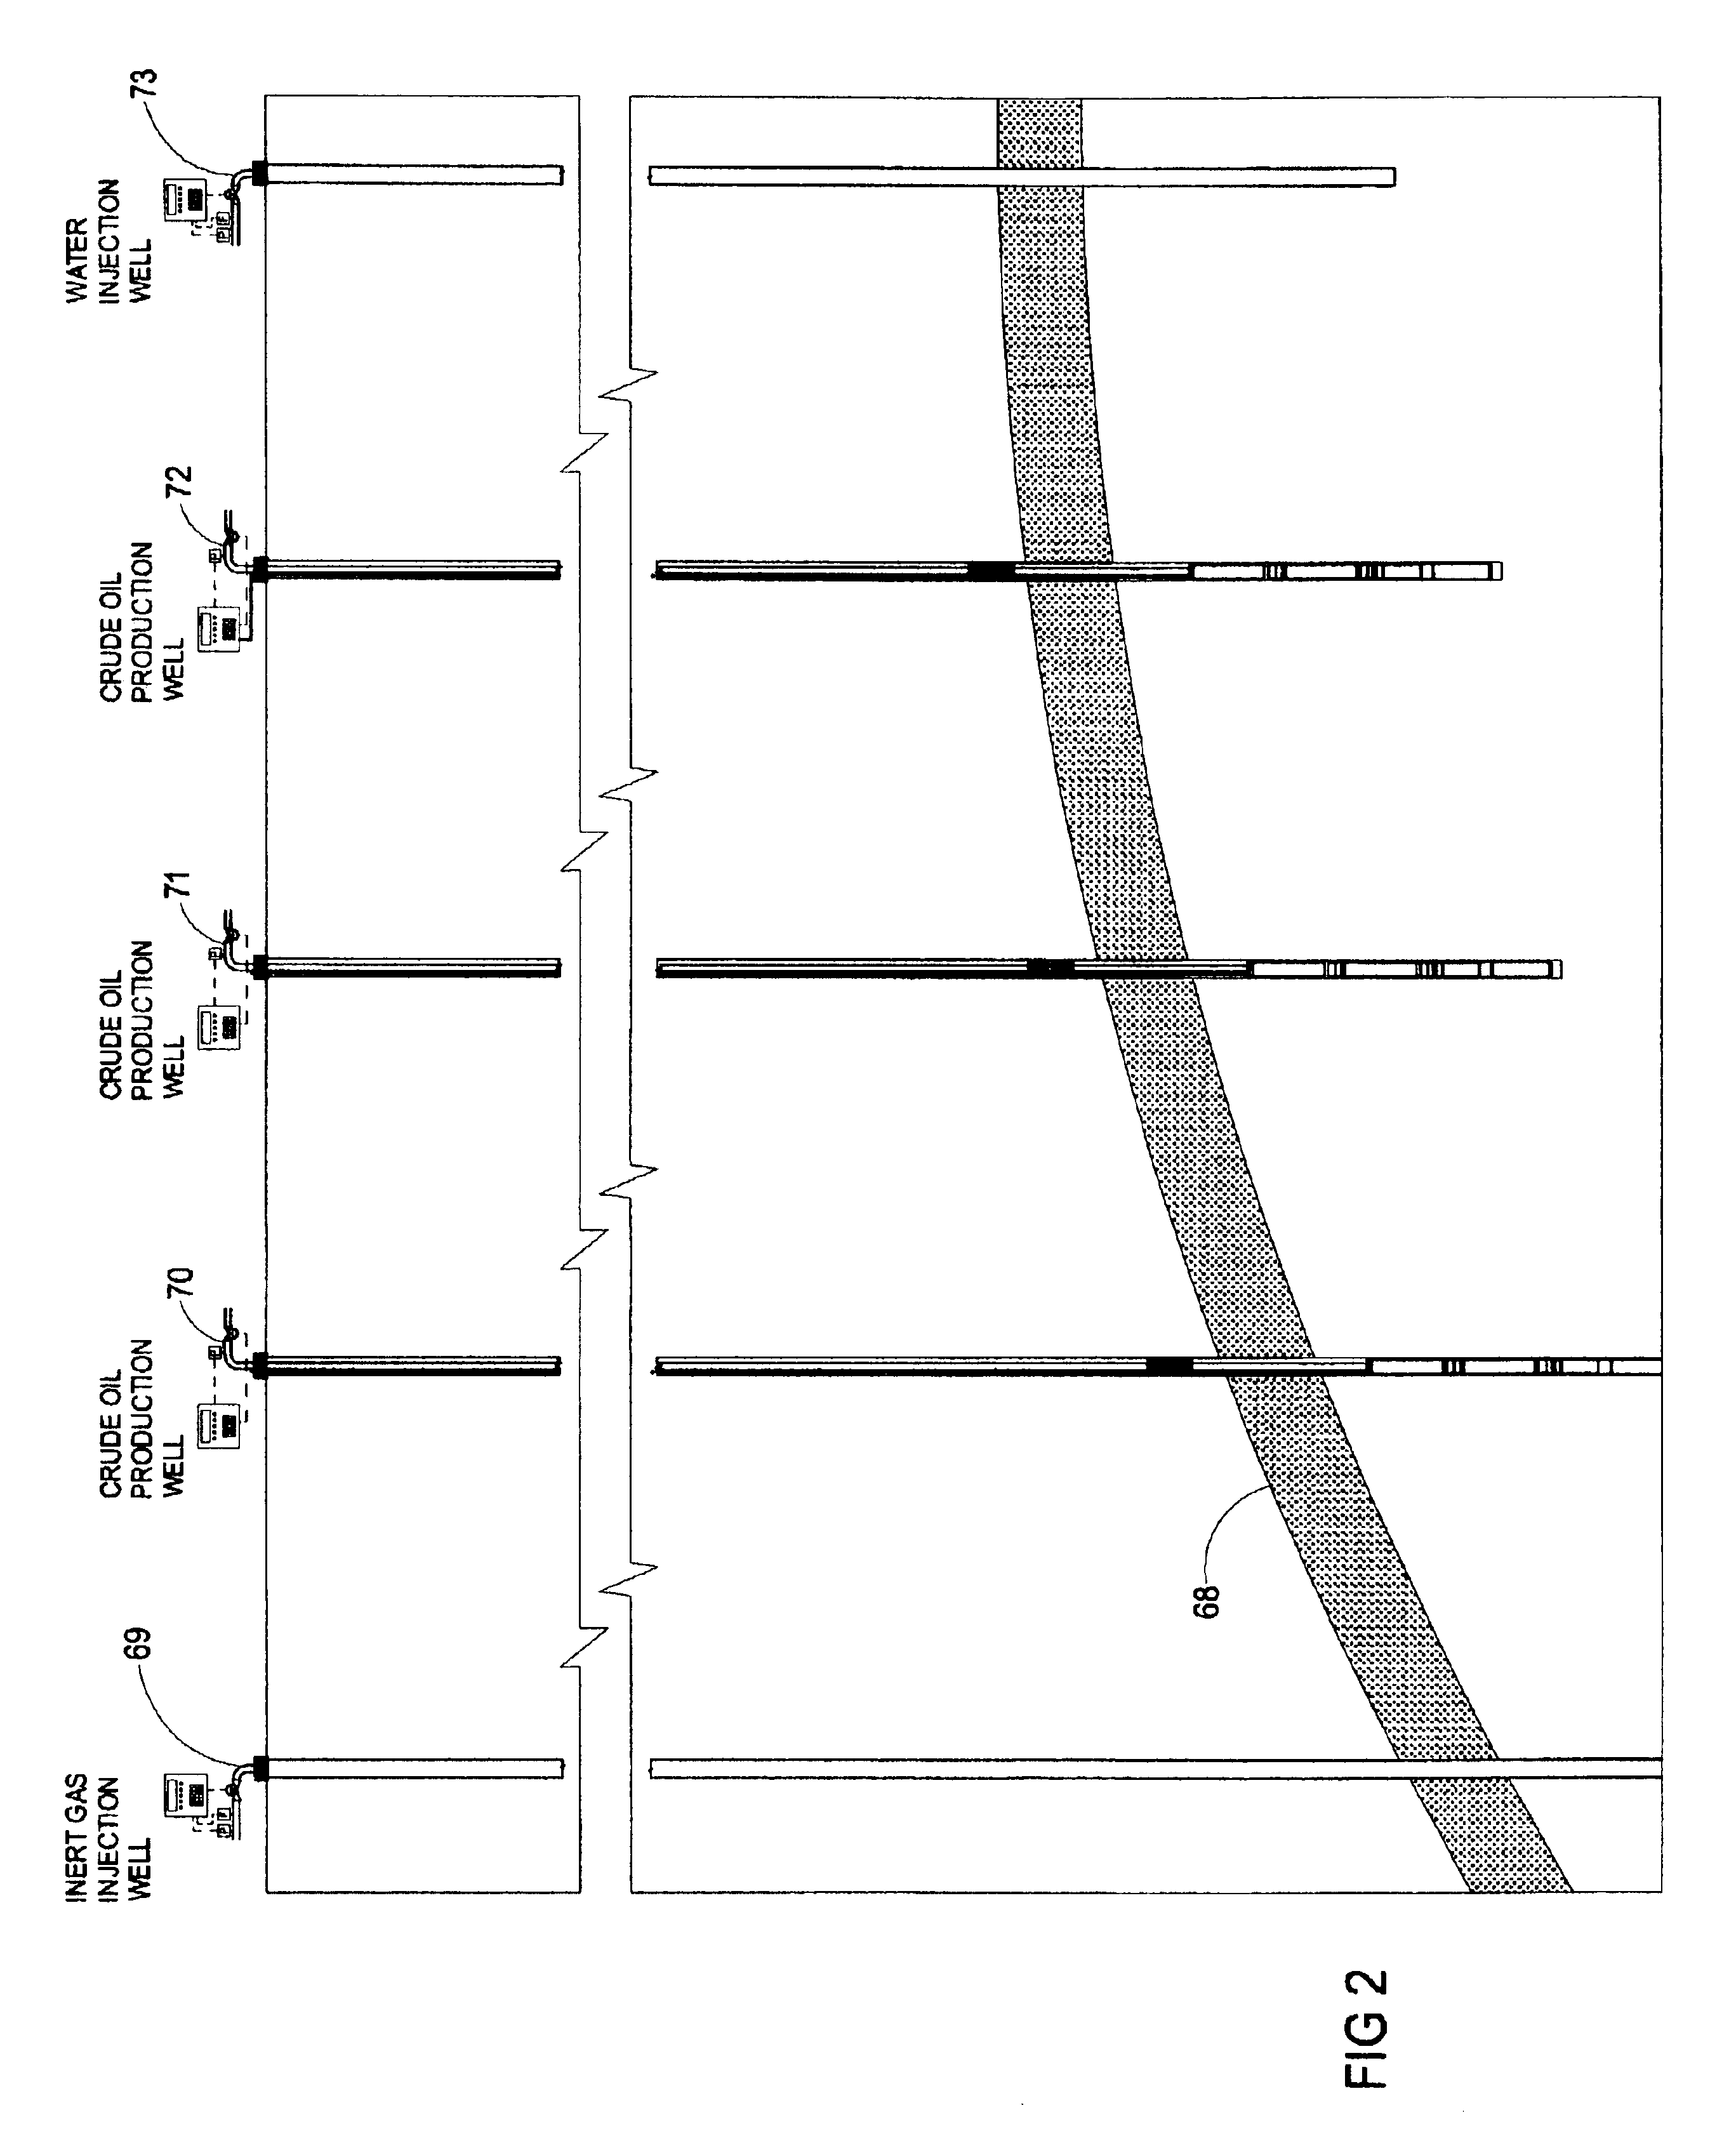 Methods and apparatus for increasing and extending oil production from underground formations nearly depleted of natural gas drive